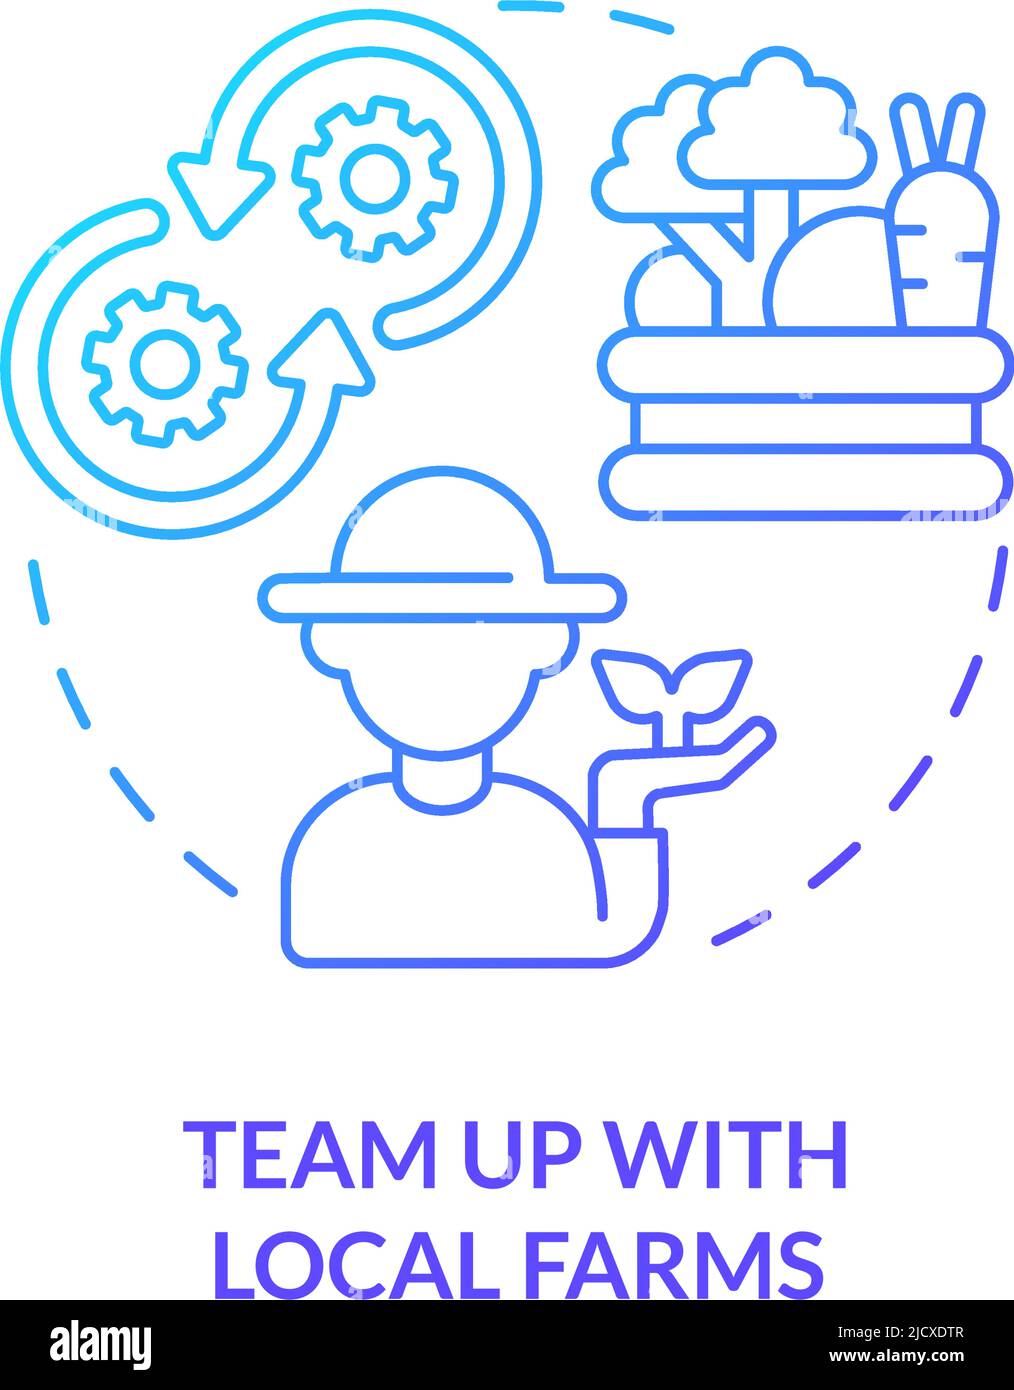 Team up with local farms blue gradient concept icon Stock Vector